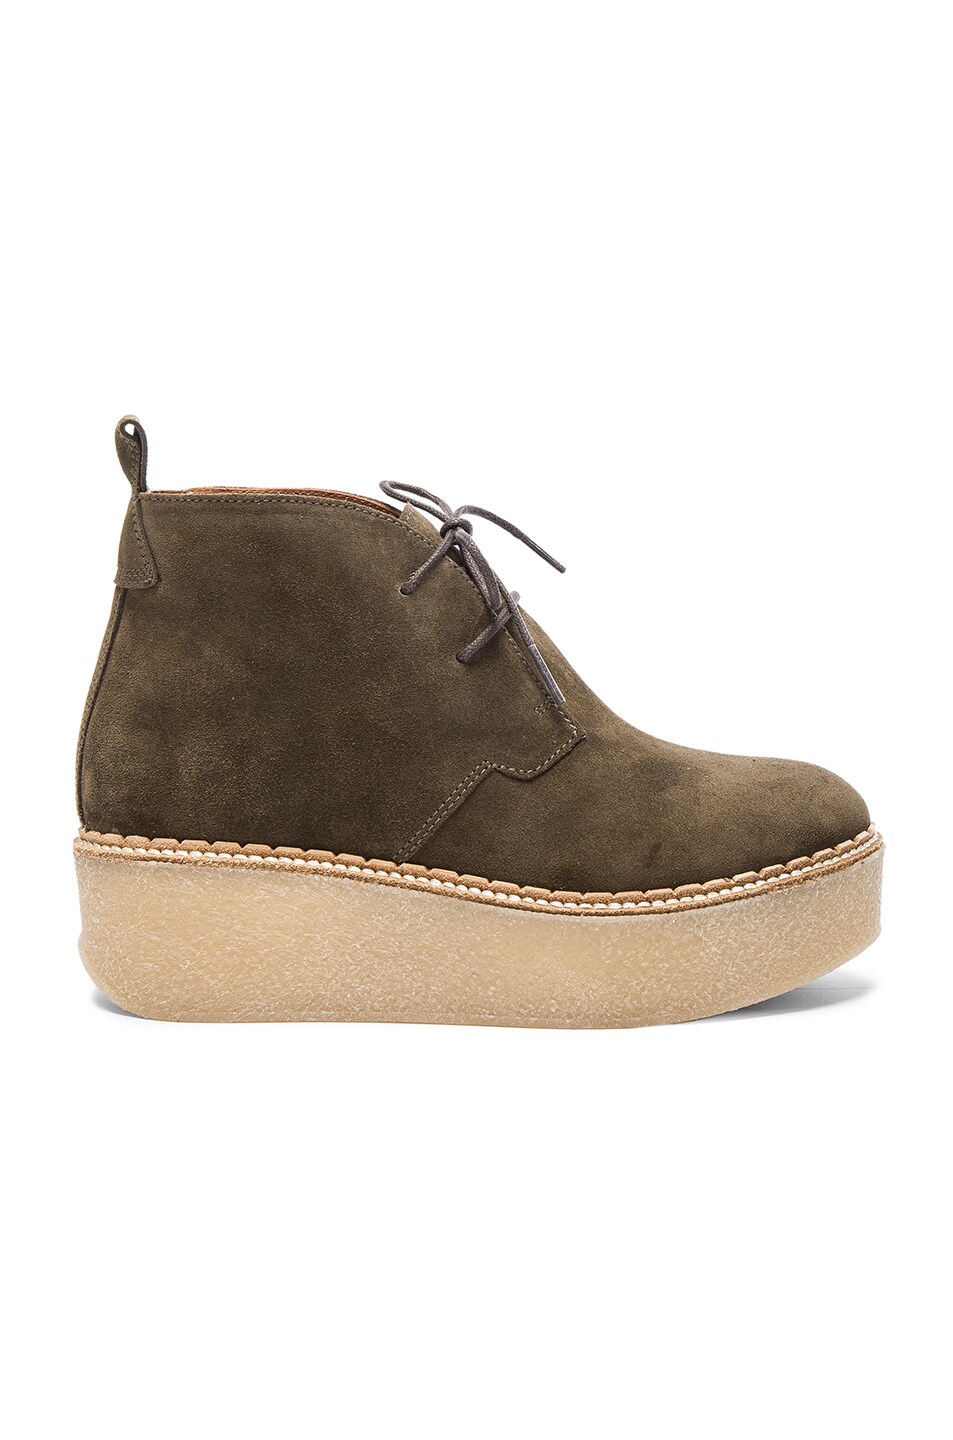 Image 1 of Flamingos Suede Polk Boots in Khaki & Natural